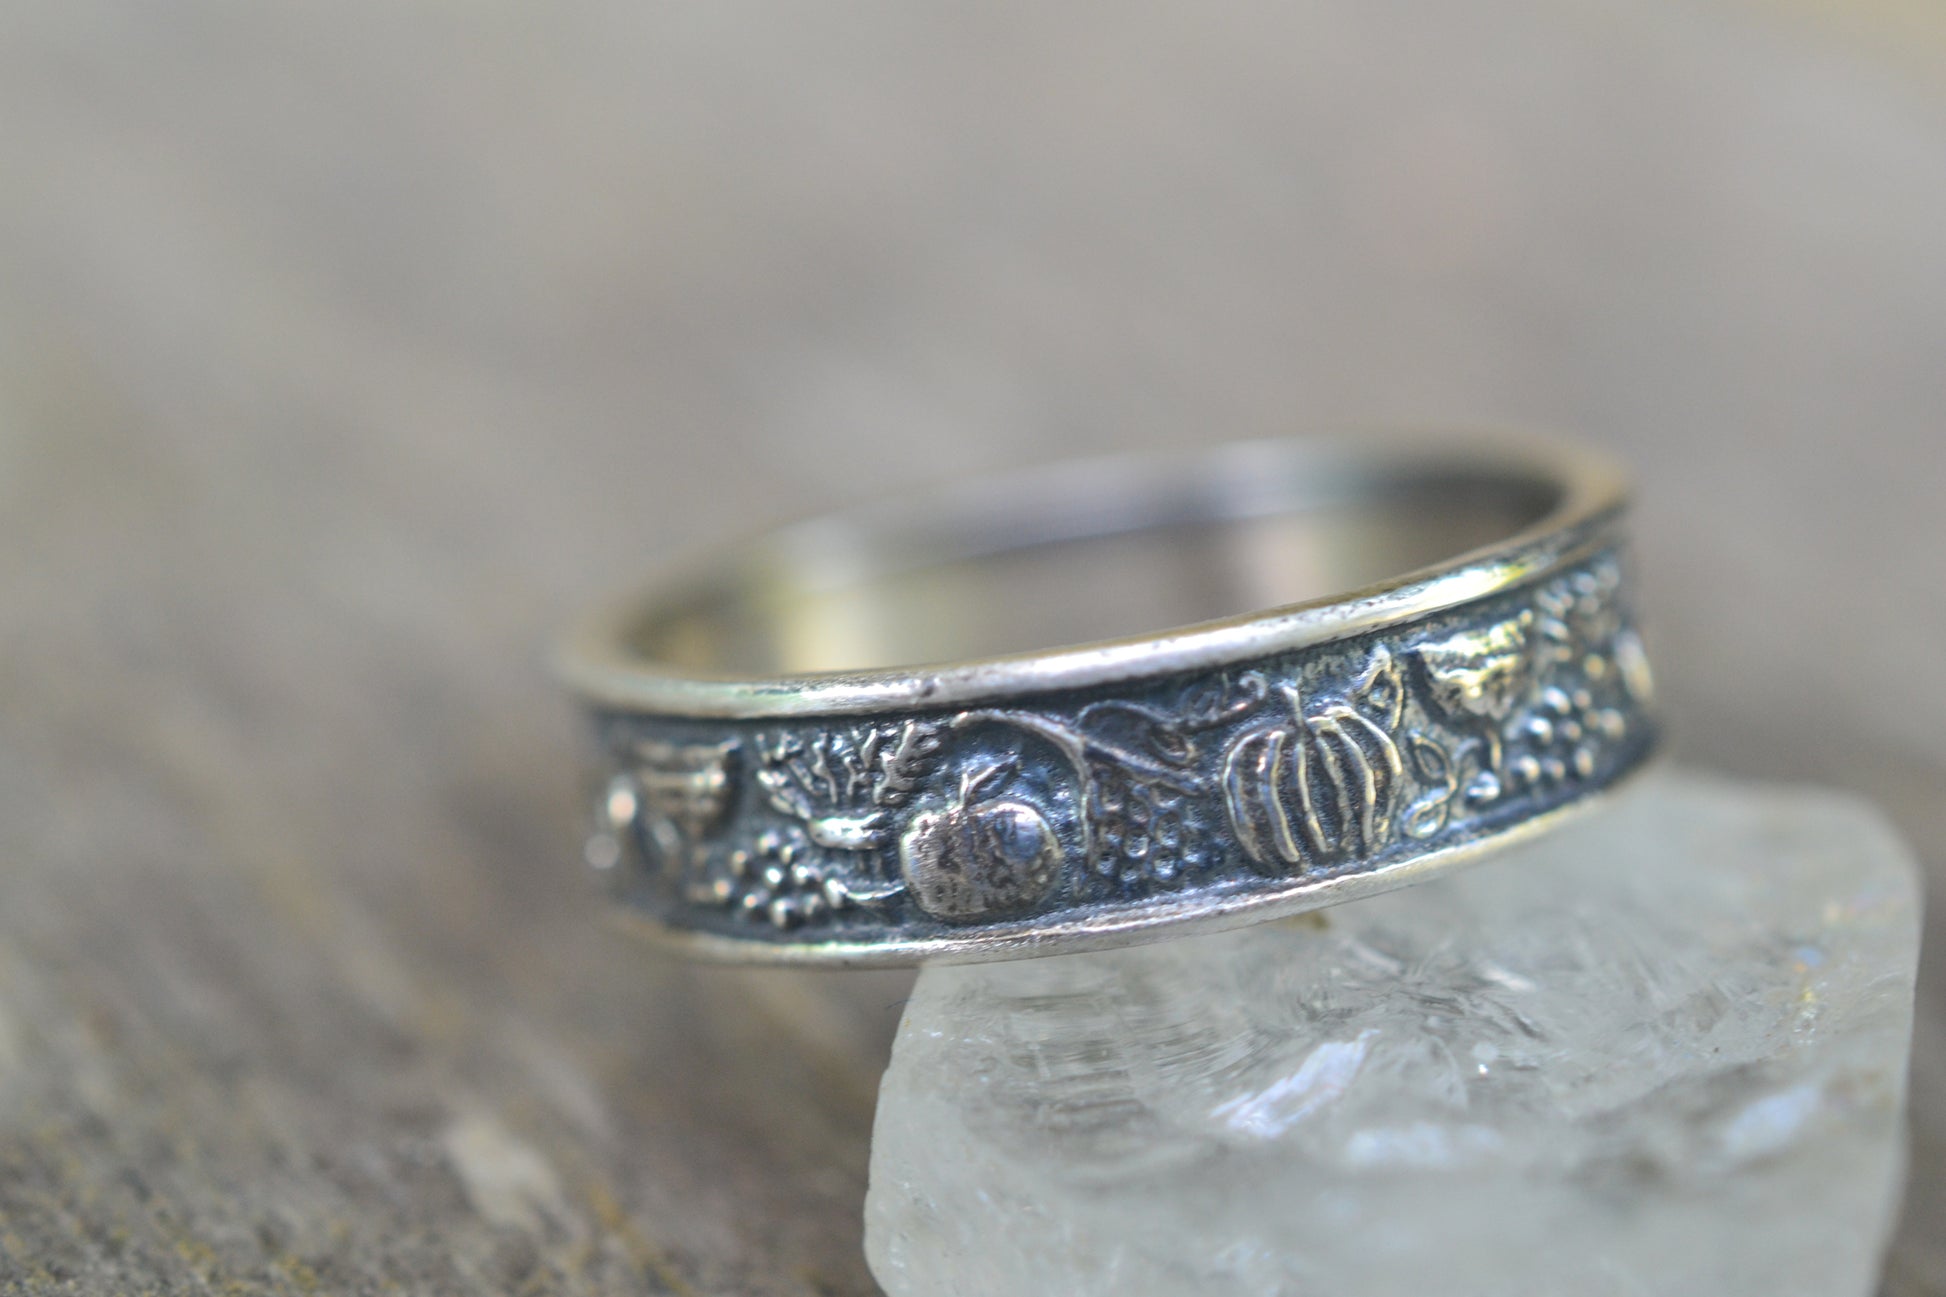 Horn of Plenty Handfasting Ring in Oxidised Silver